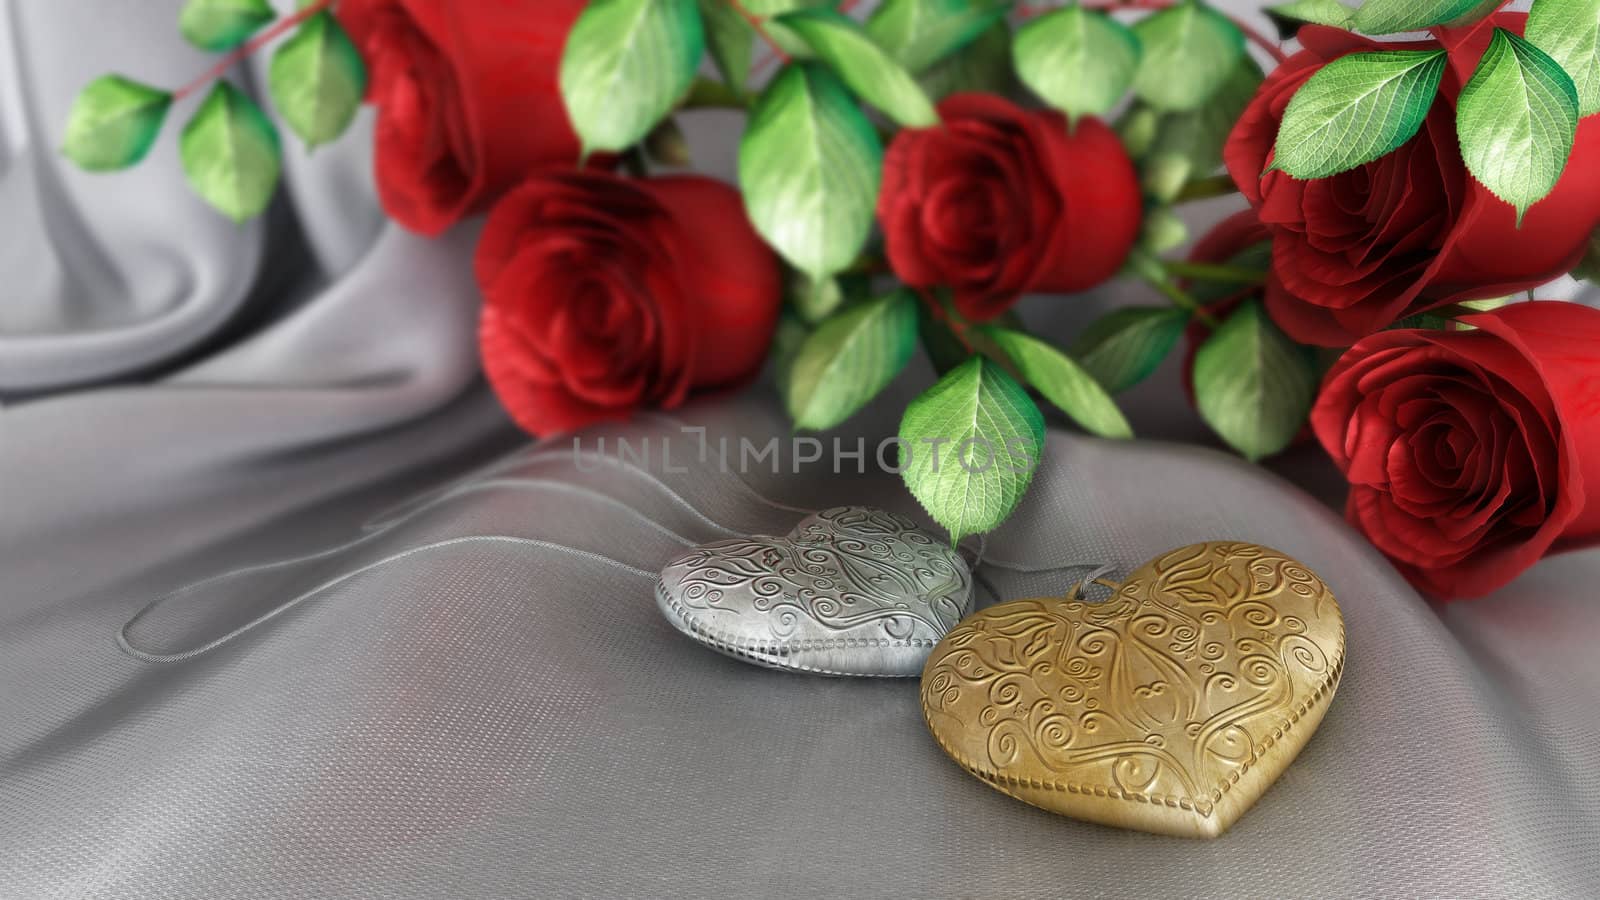 holiday and wedding background with roses, jewelry and fabric by denisgo